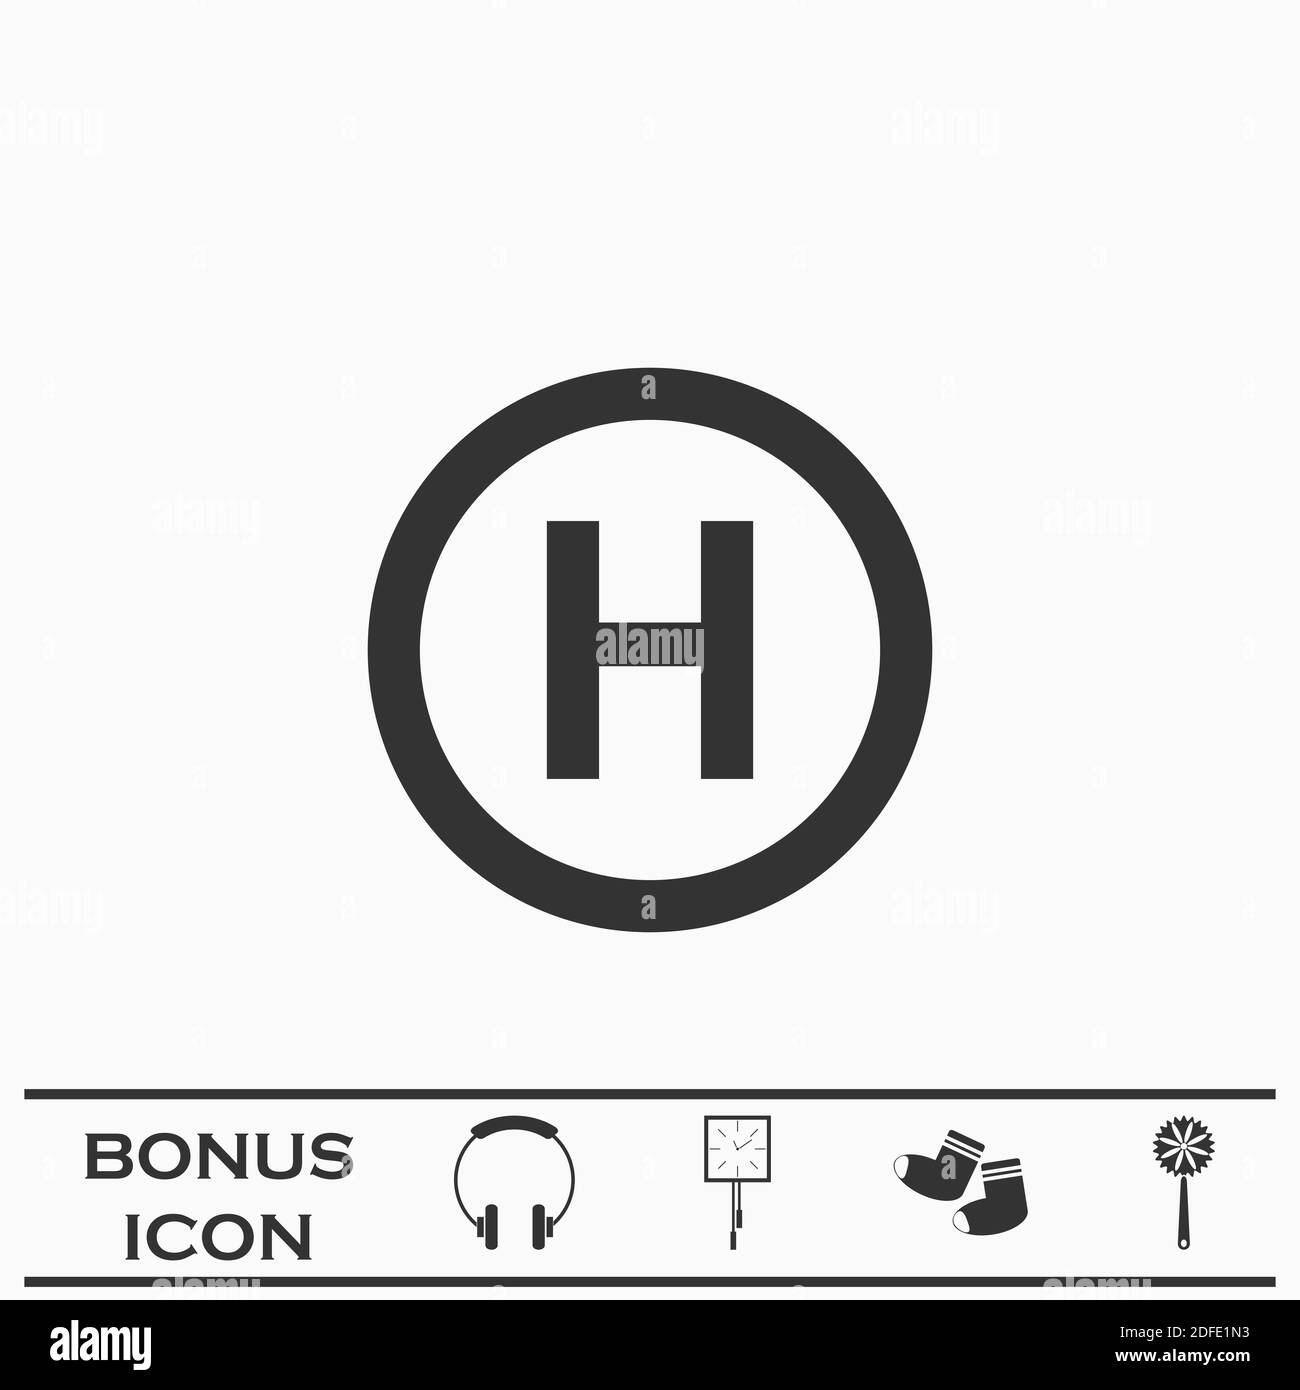 Helicopter landing icon flat. Black pictogram on white background. Vector illustration symbol and bonus button Stock Vector